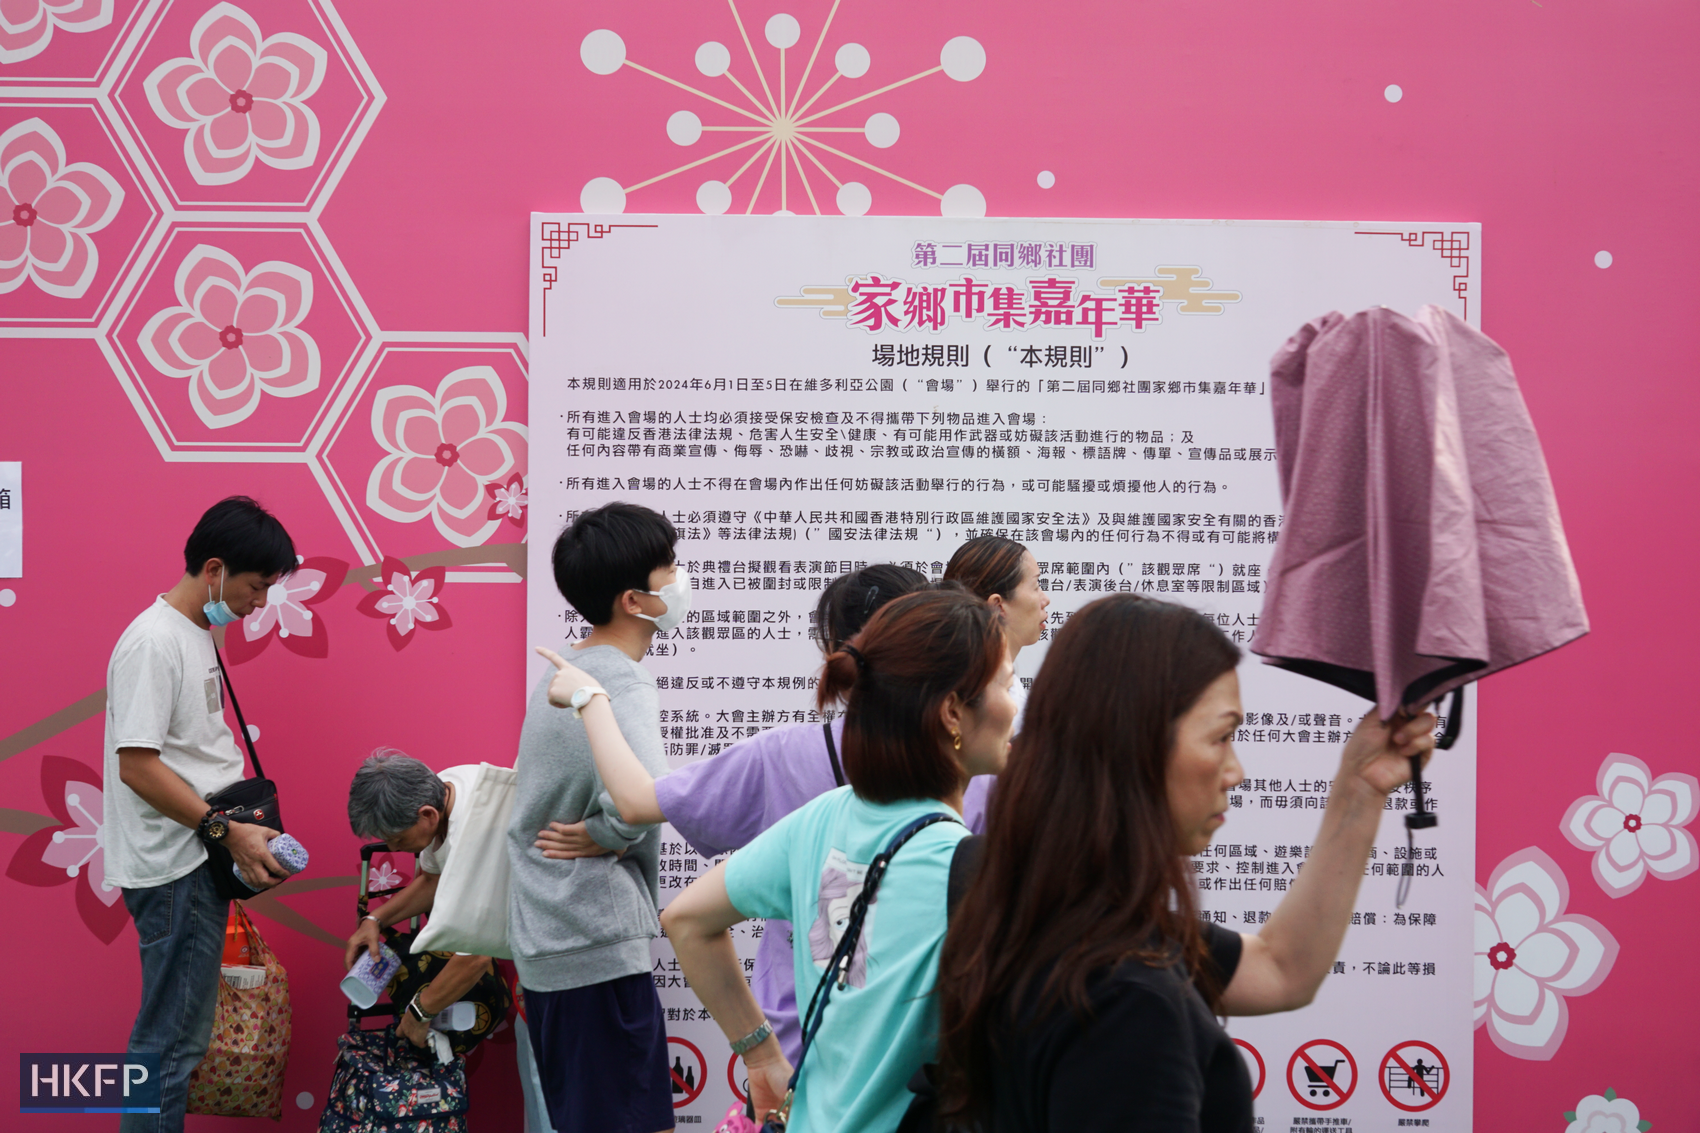 A large sign that shows the rules of a five-day "Hometown Market" held by pro-Beijing groups in Victoria Park in Causeway Bay, Hong Kong. Photo: Hans Tse/HKFP.